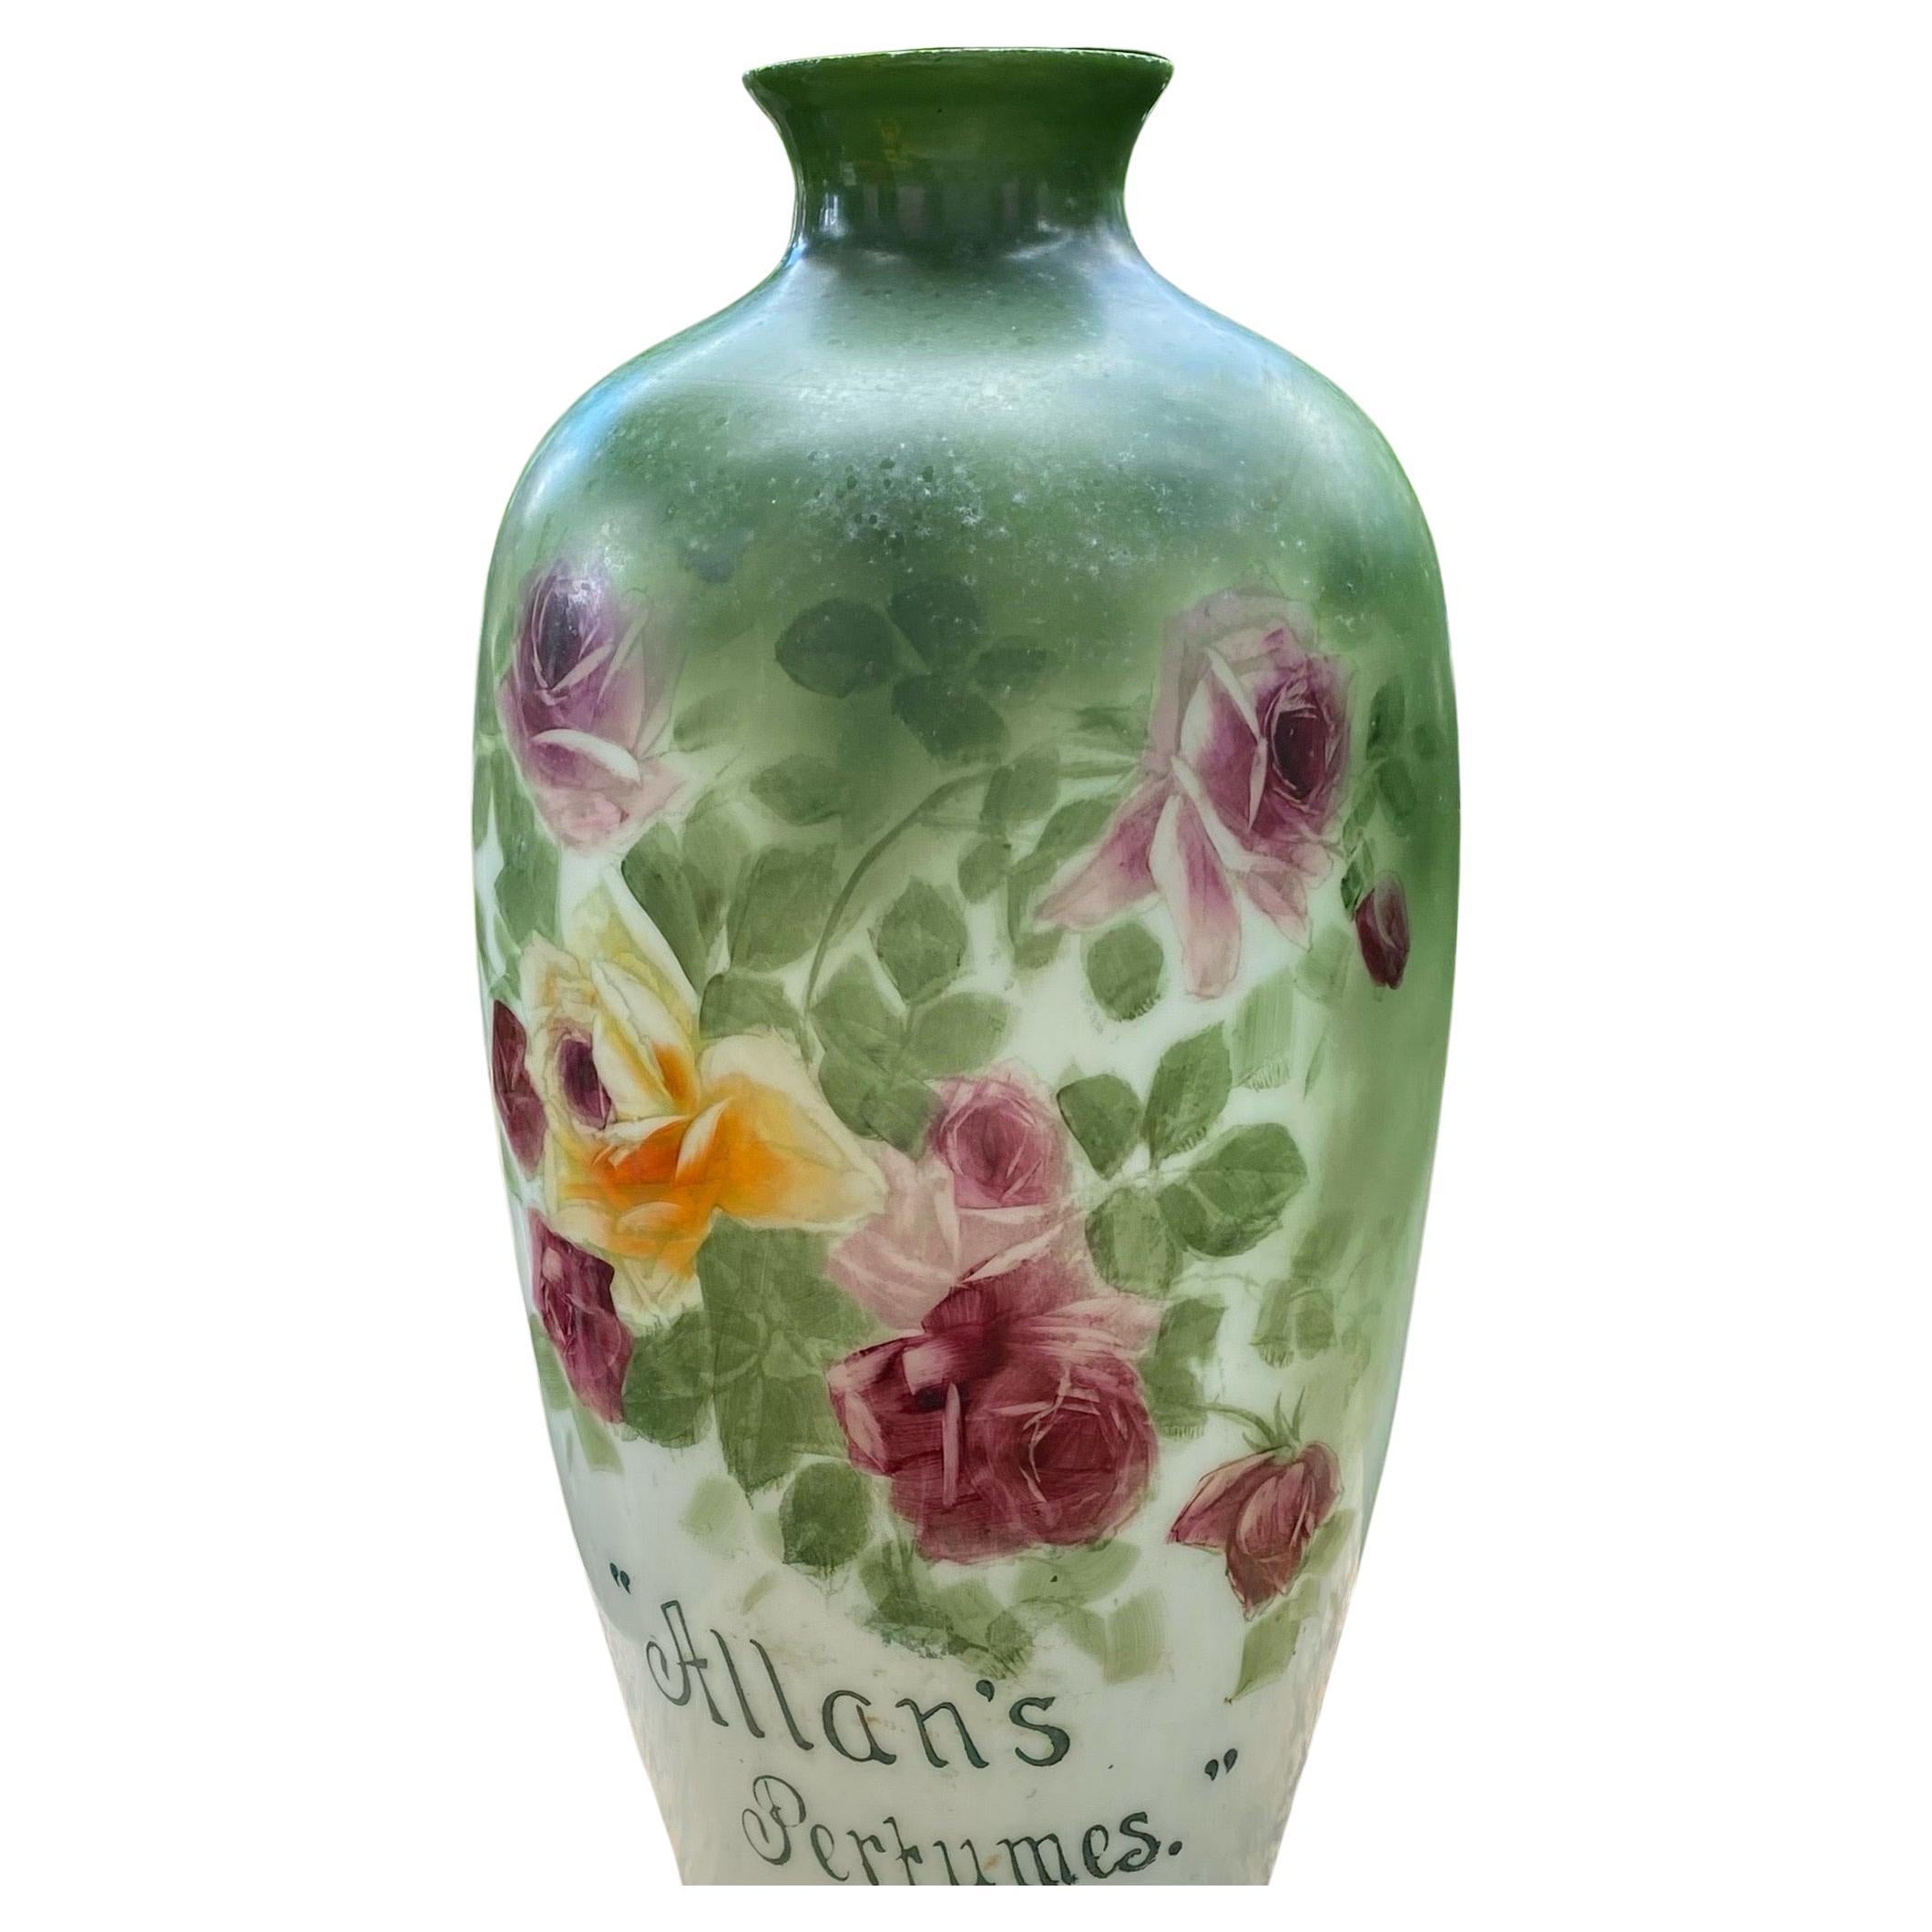 A Large Antique Hand-Painted Milk Glass Allan Perfumer Bottle from the Louisiana Purchase Exposition, St. Louis, 1904, Created By The Venerable Fostoria Company. 
The Louisiana Purchase Exposition, informally known as the St. Louis World's Fair, was